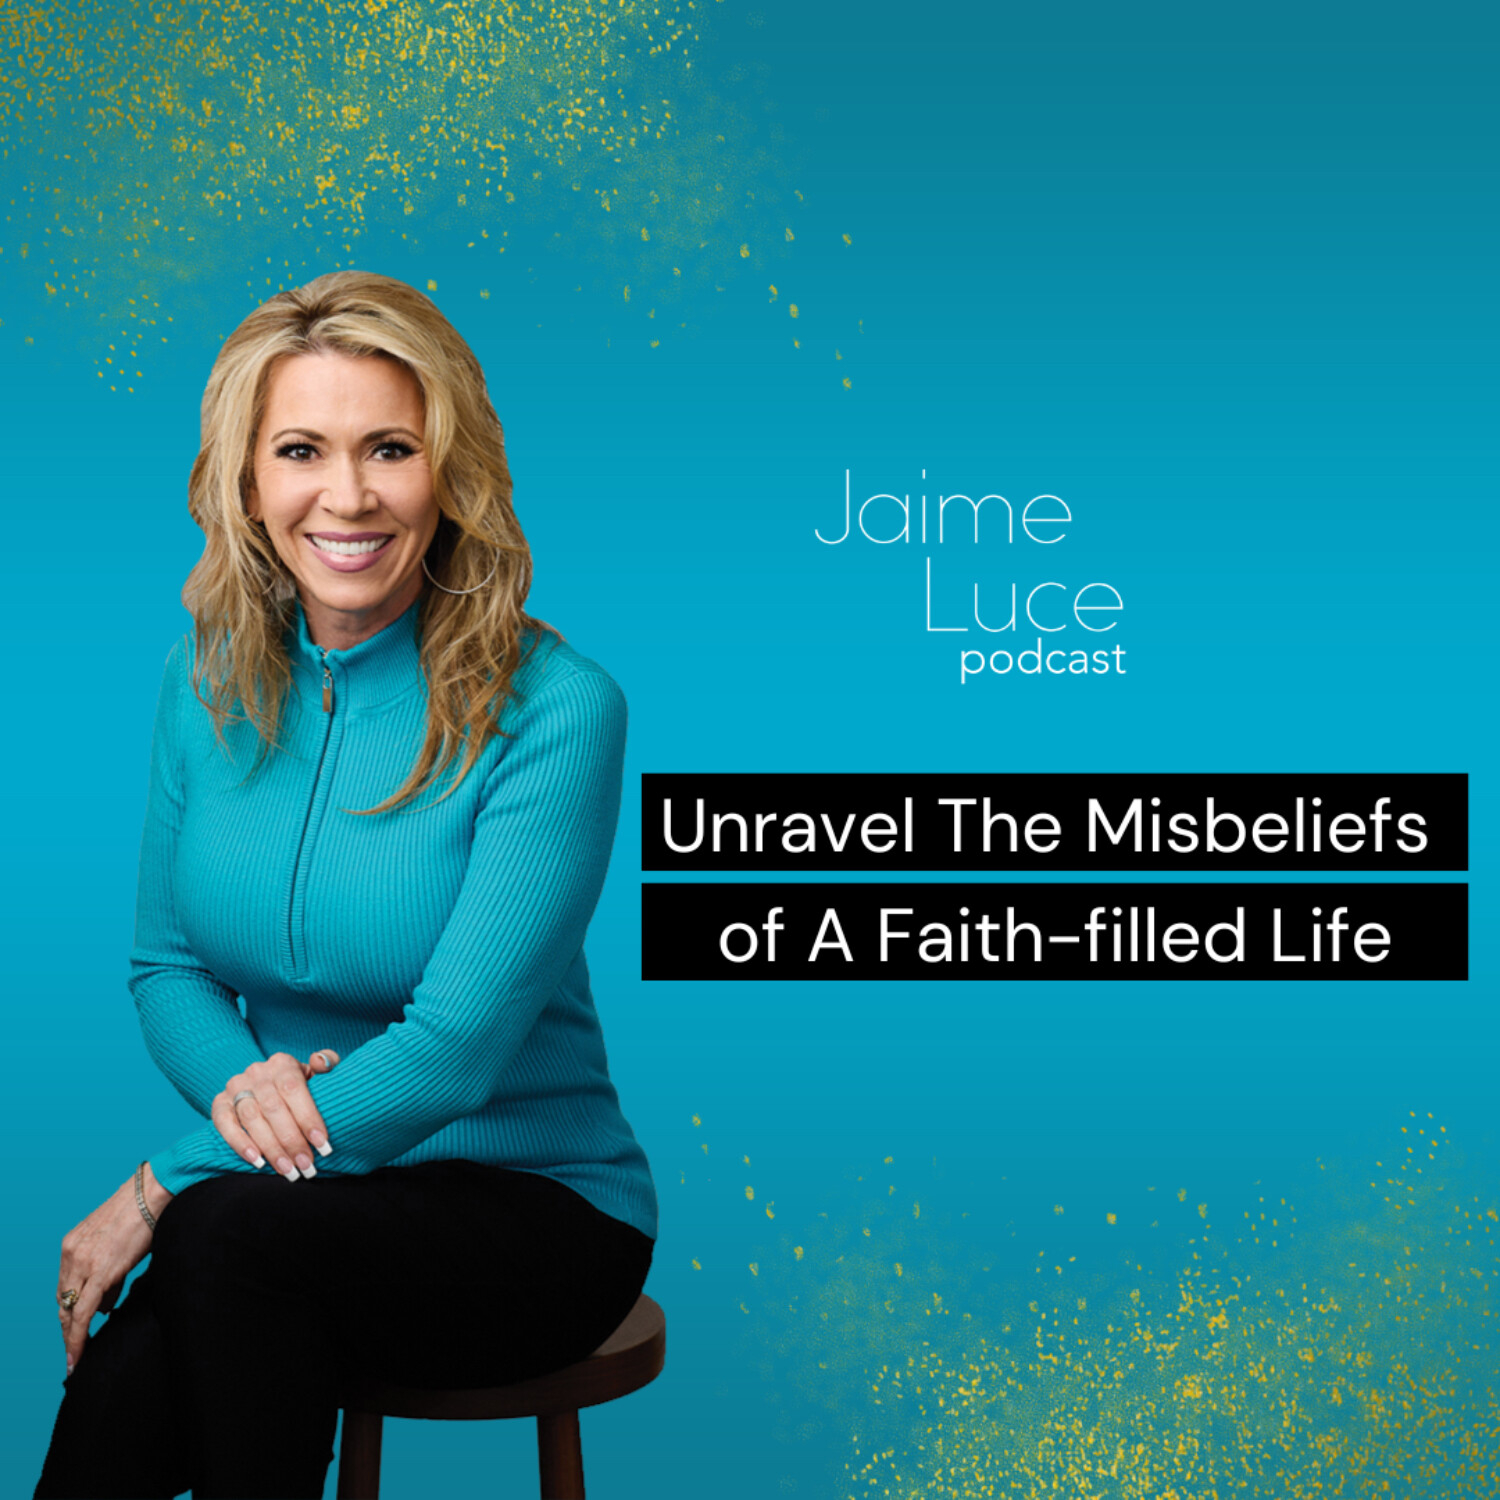 Unravel The Misbeliefs of A Faith-filled Life